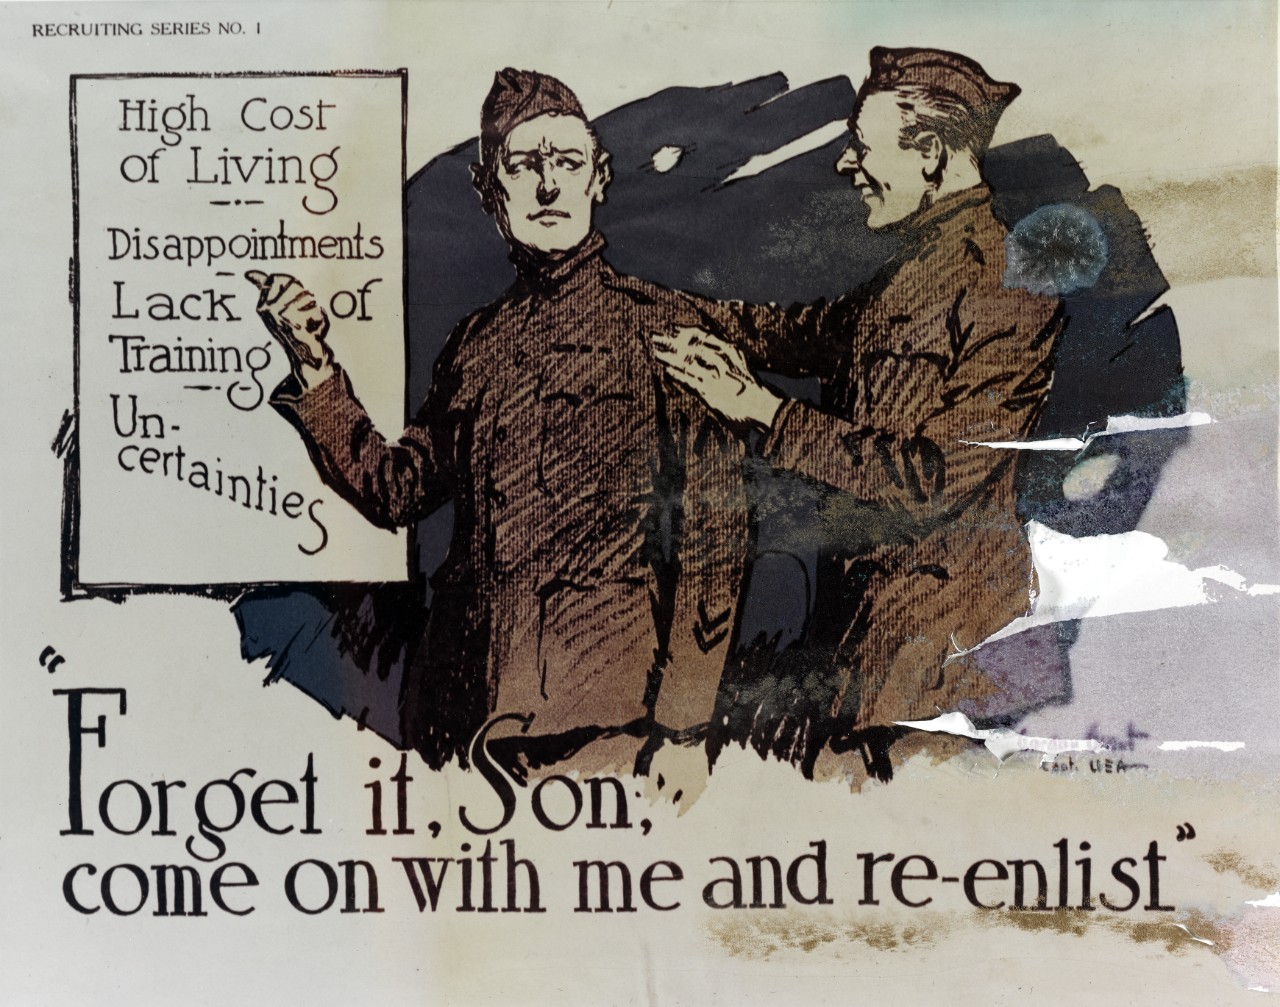 World War I army recruiting poster